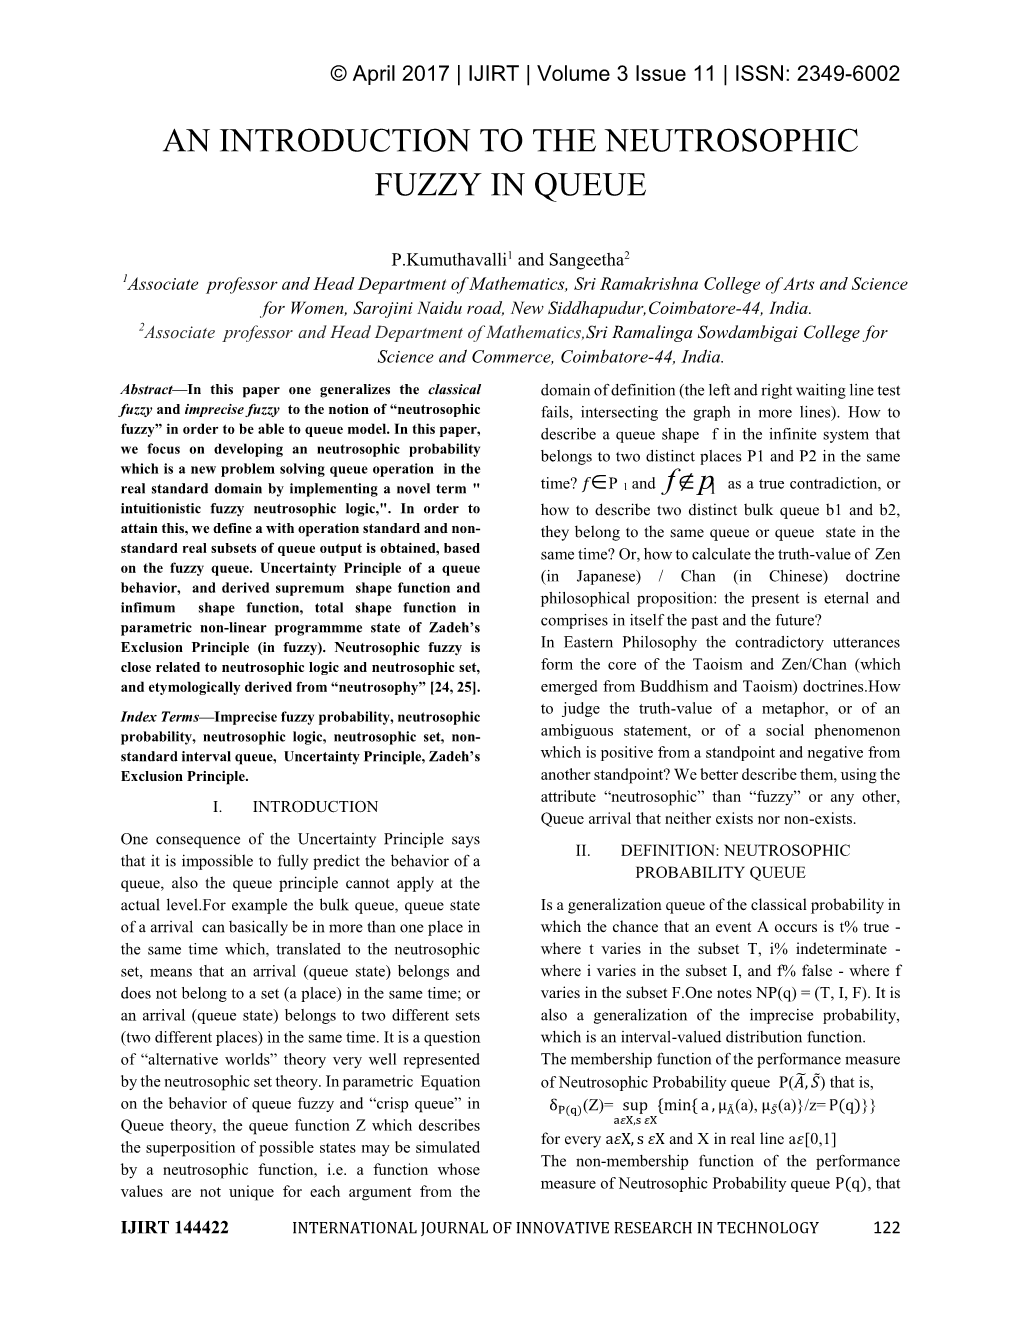 An Introduction to the Neutrosophic Fuzzy in Queue